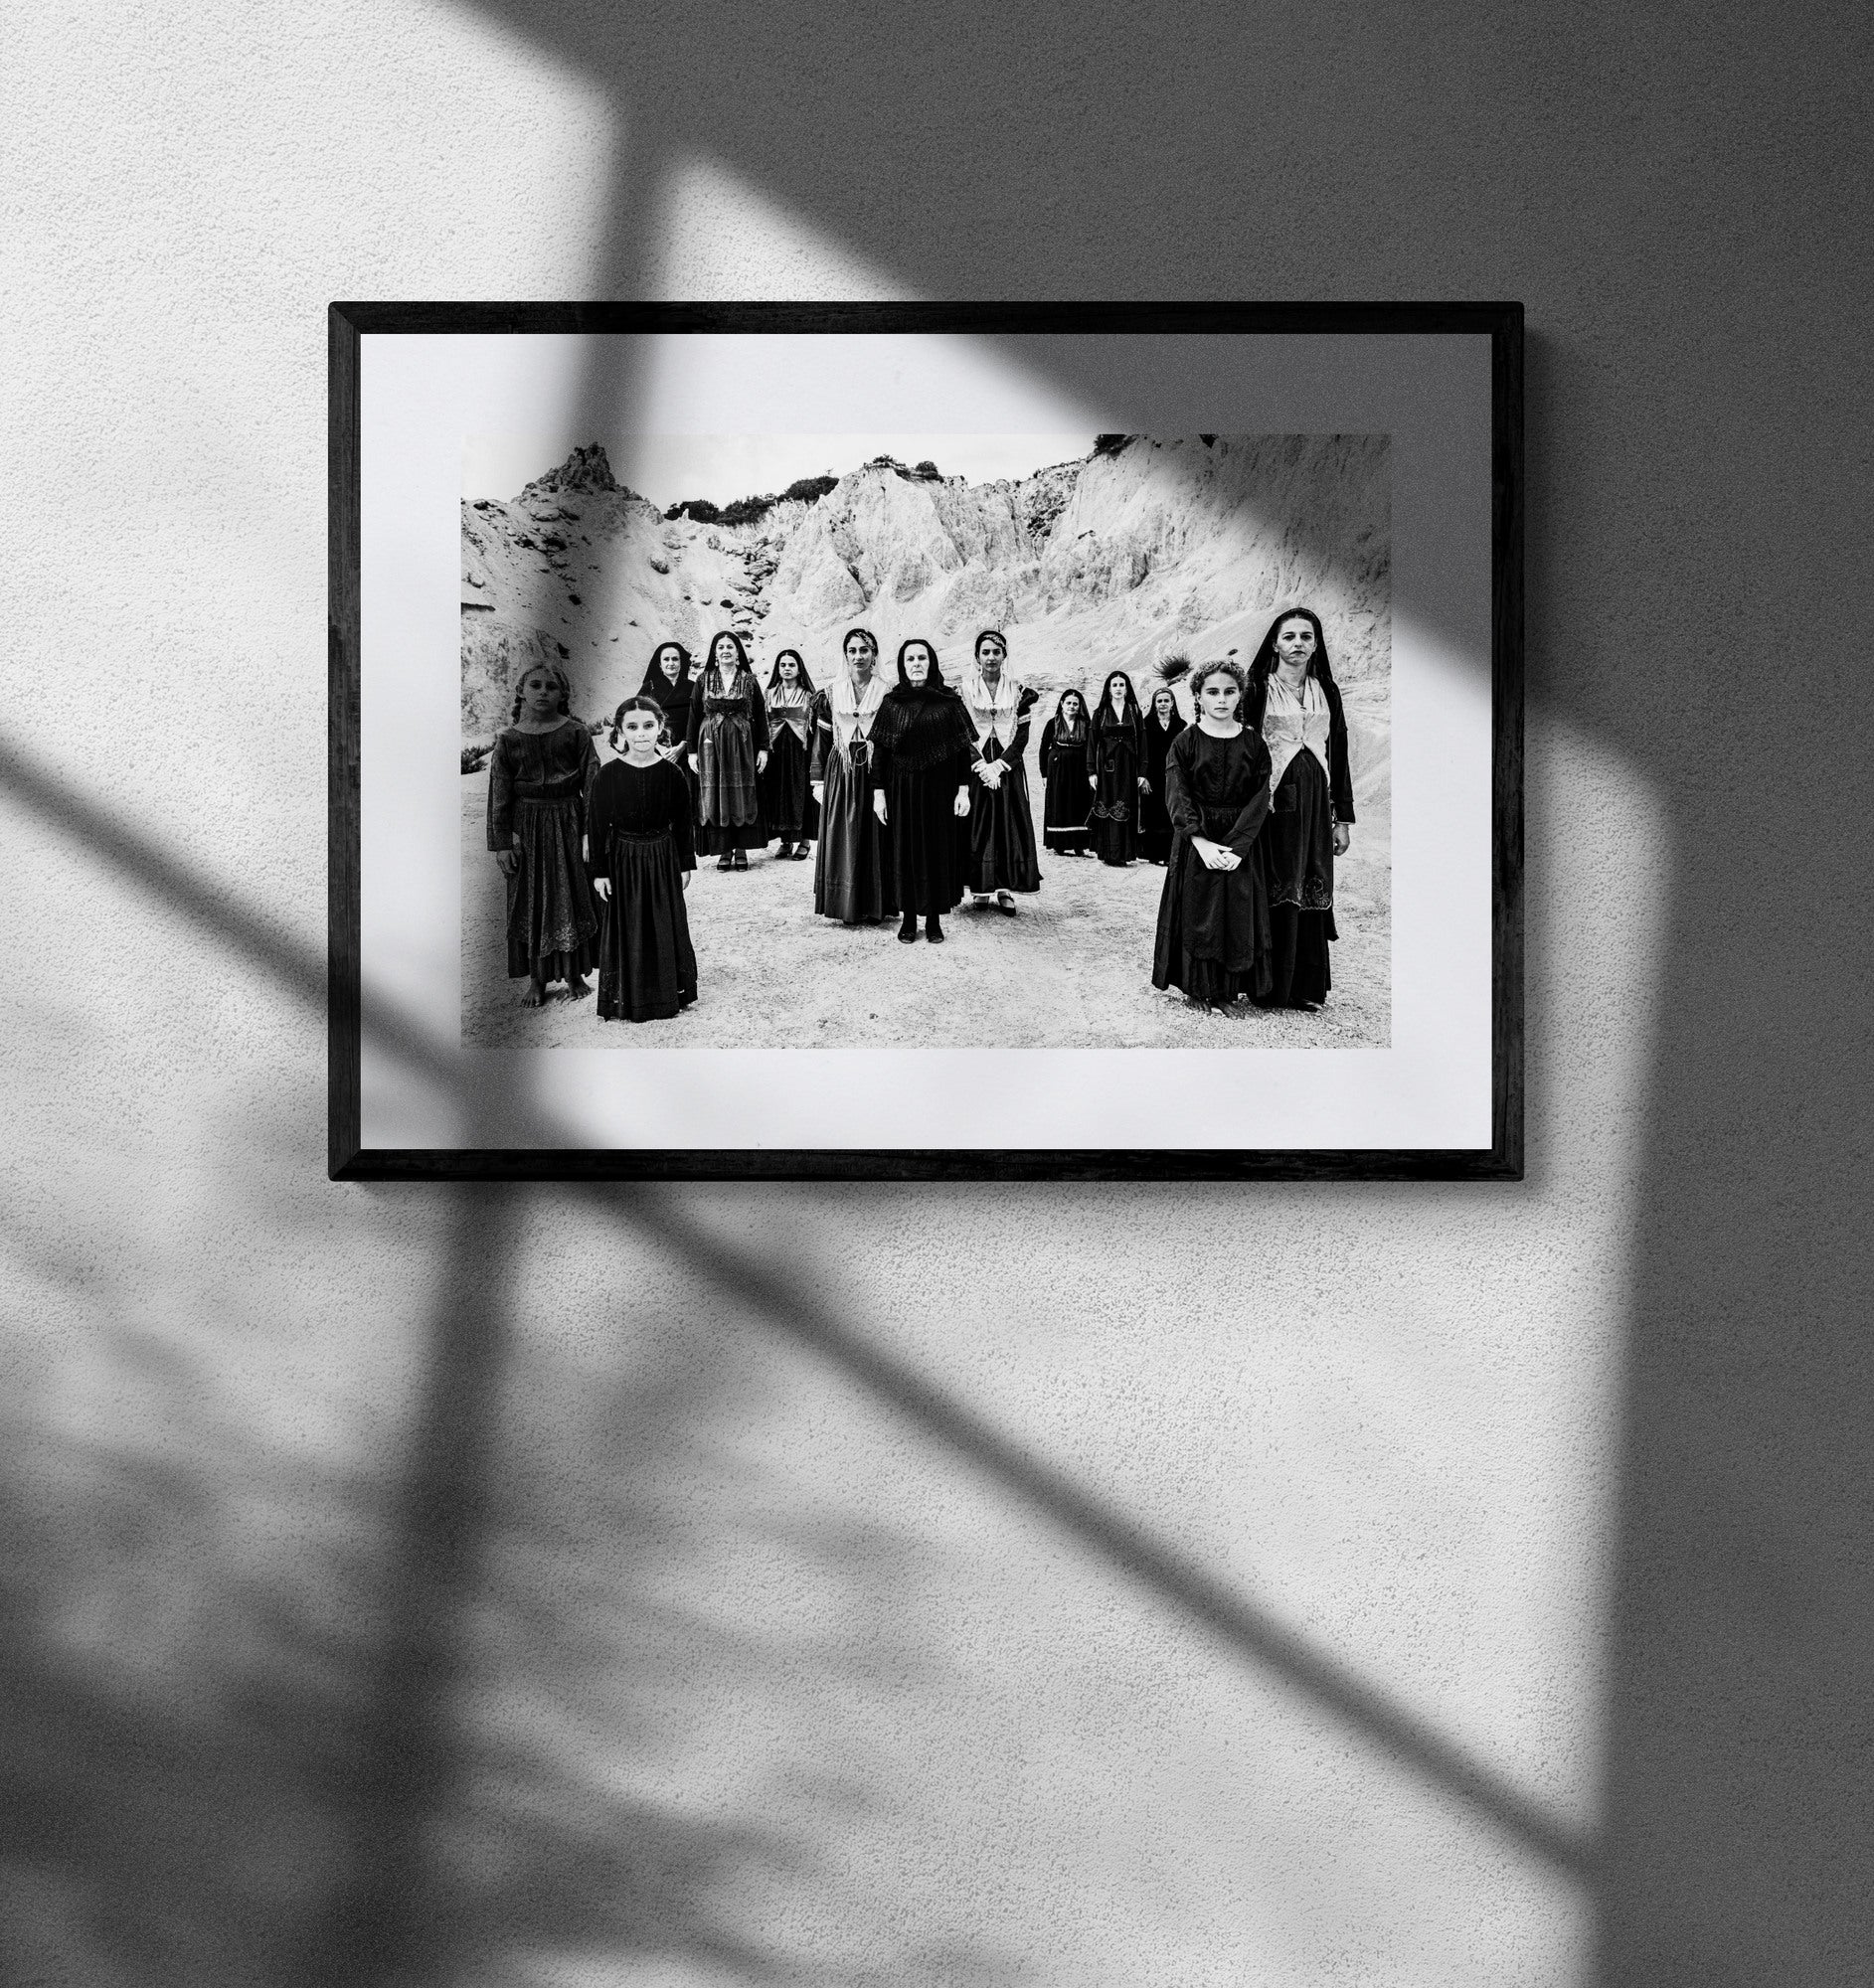 Black and White Photography Wall Art Greece | Costumes of Lefkada island multiple generations Ionian Sea by George Tatakis - single framed photo